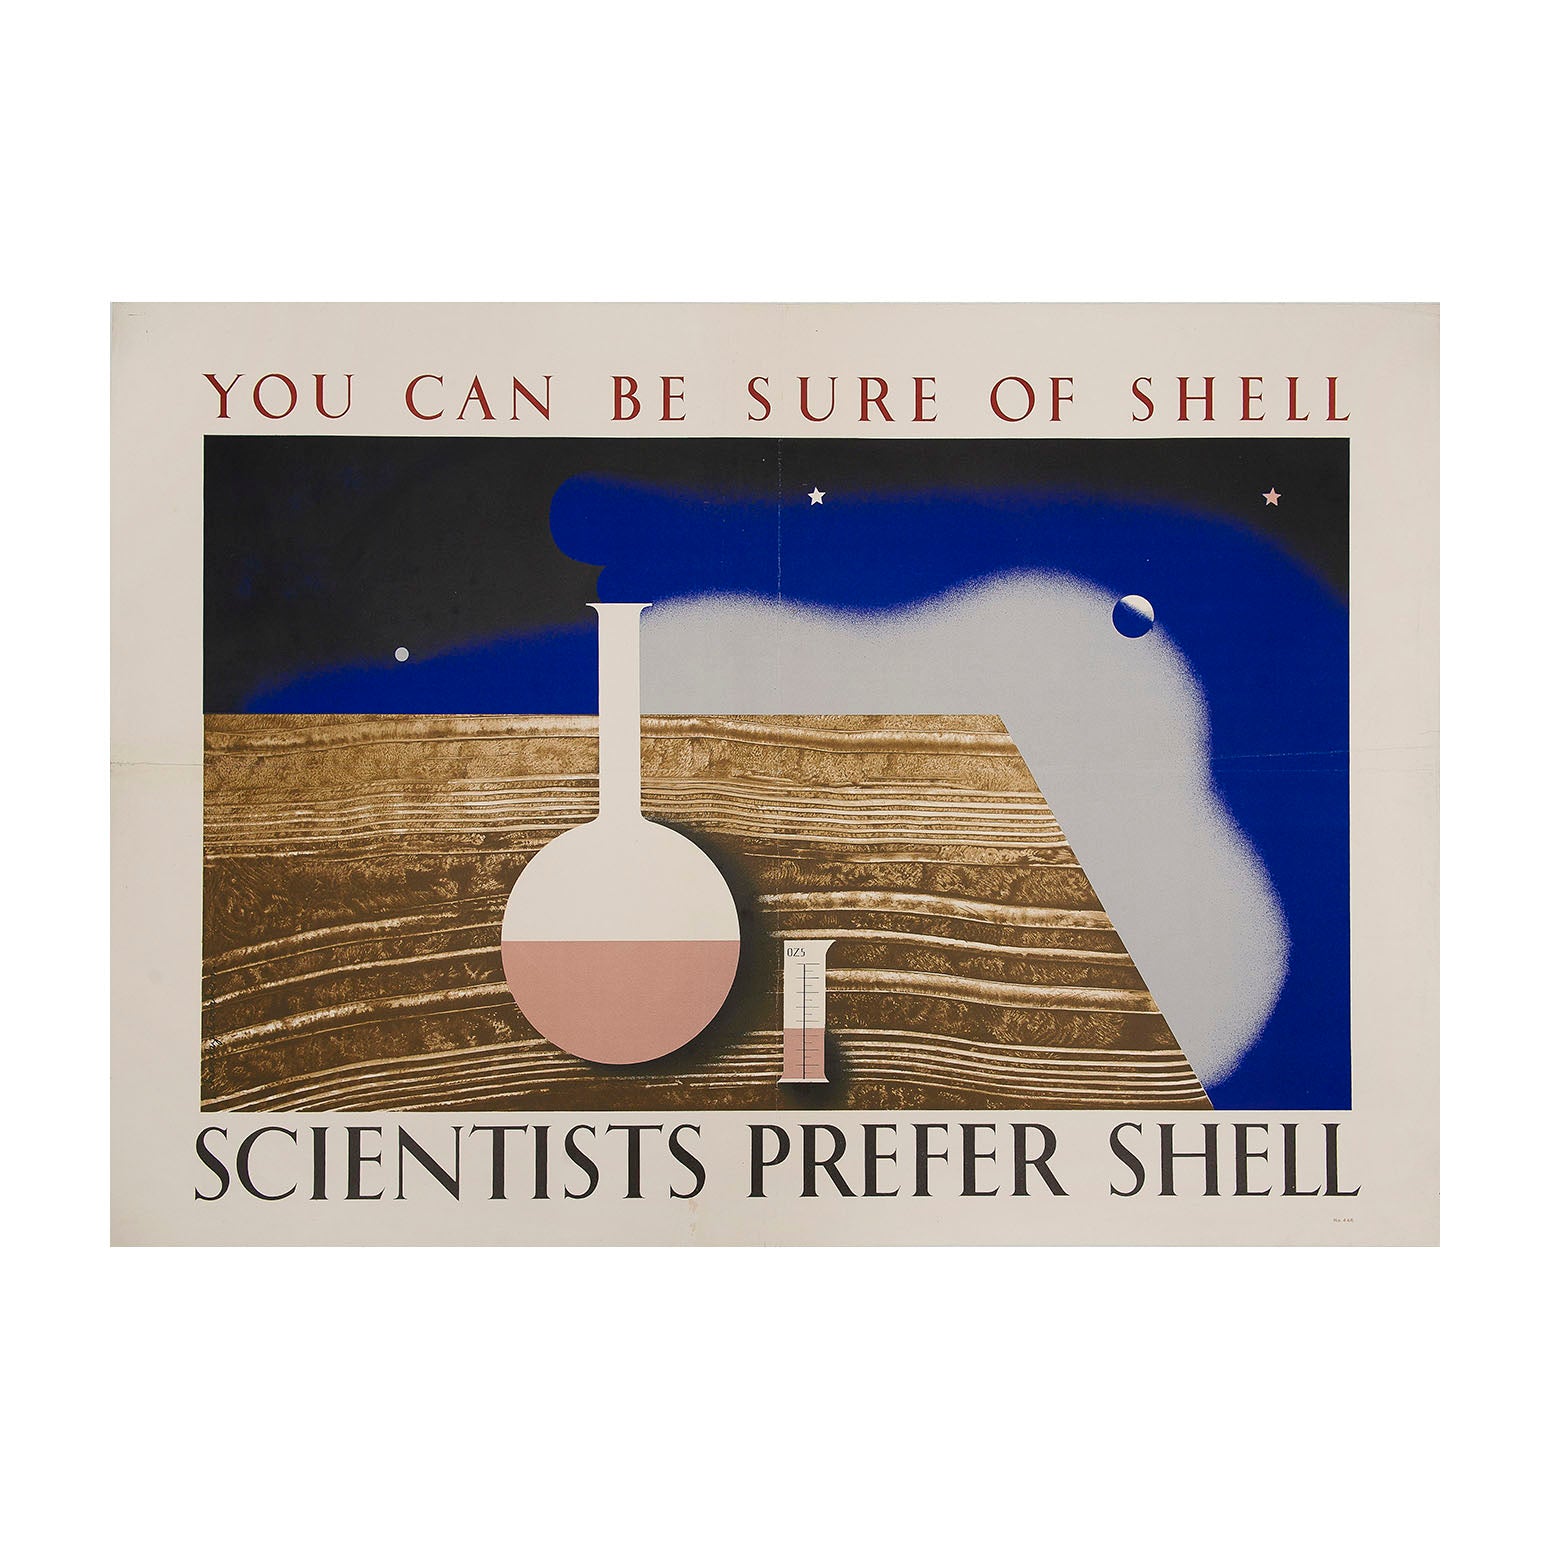 Poster, Scientists Prefer Shell, designed by Eric Lombers and Tom Eckersley, 1936. 2 chemical vessels on a chemical bench juxtaposed against a night sky with stars, a vaporous cloud and a planet. Modernist